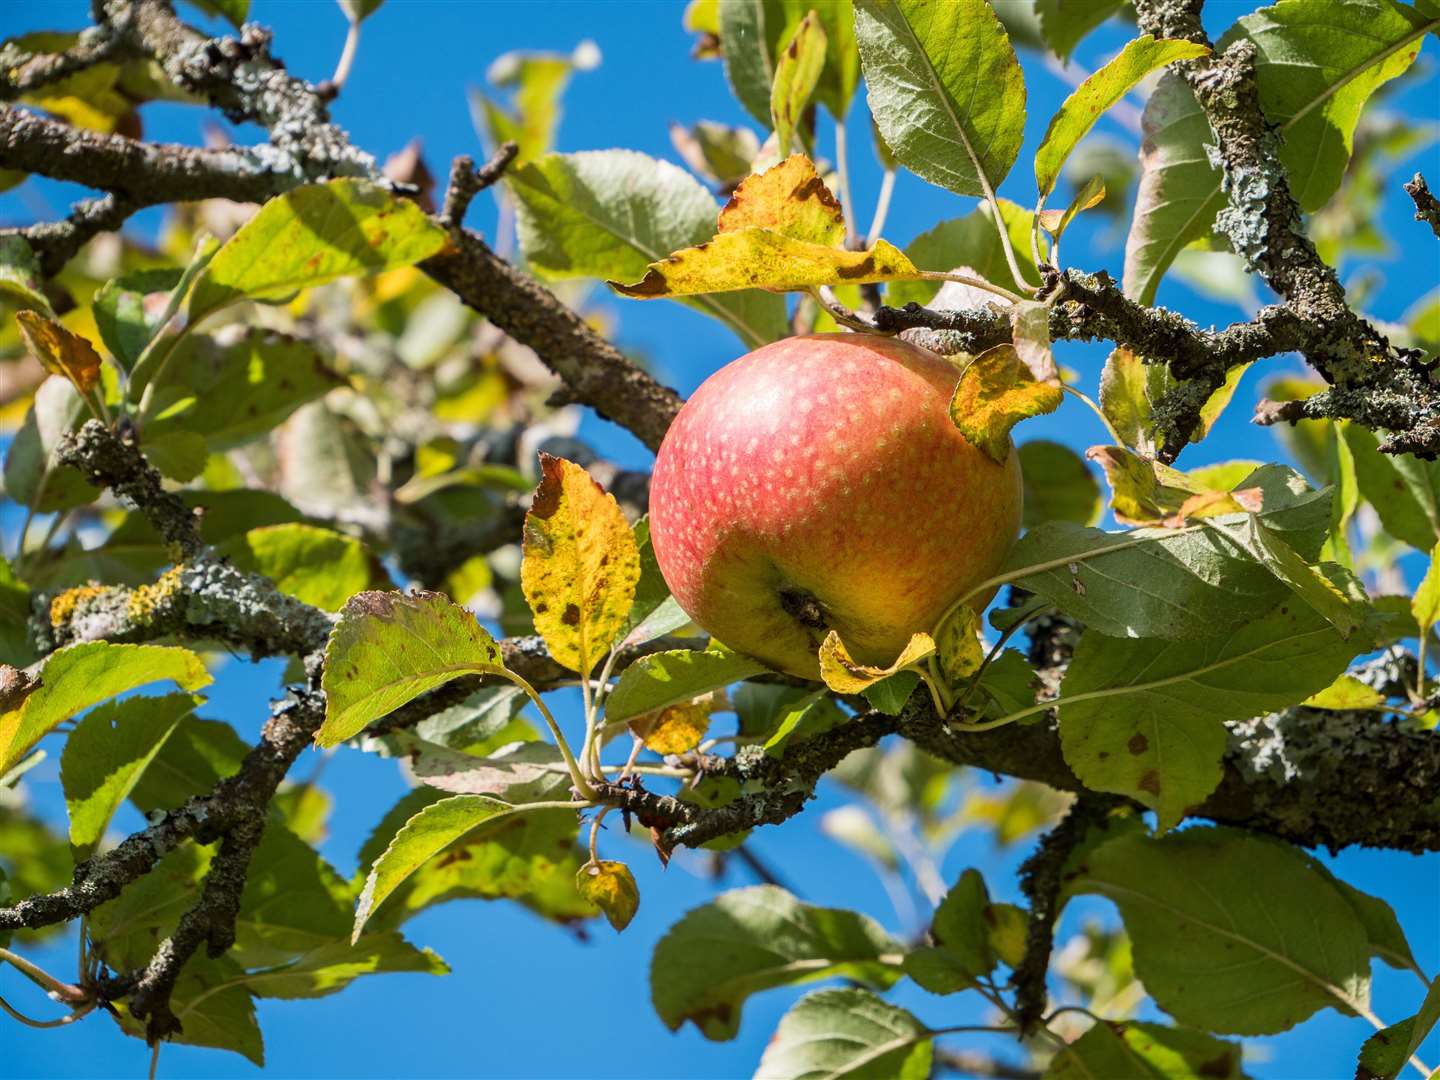 British-grown apples are among the crops that could be at risk